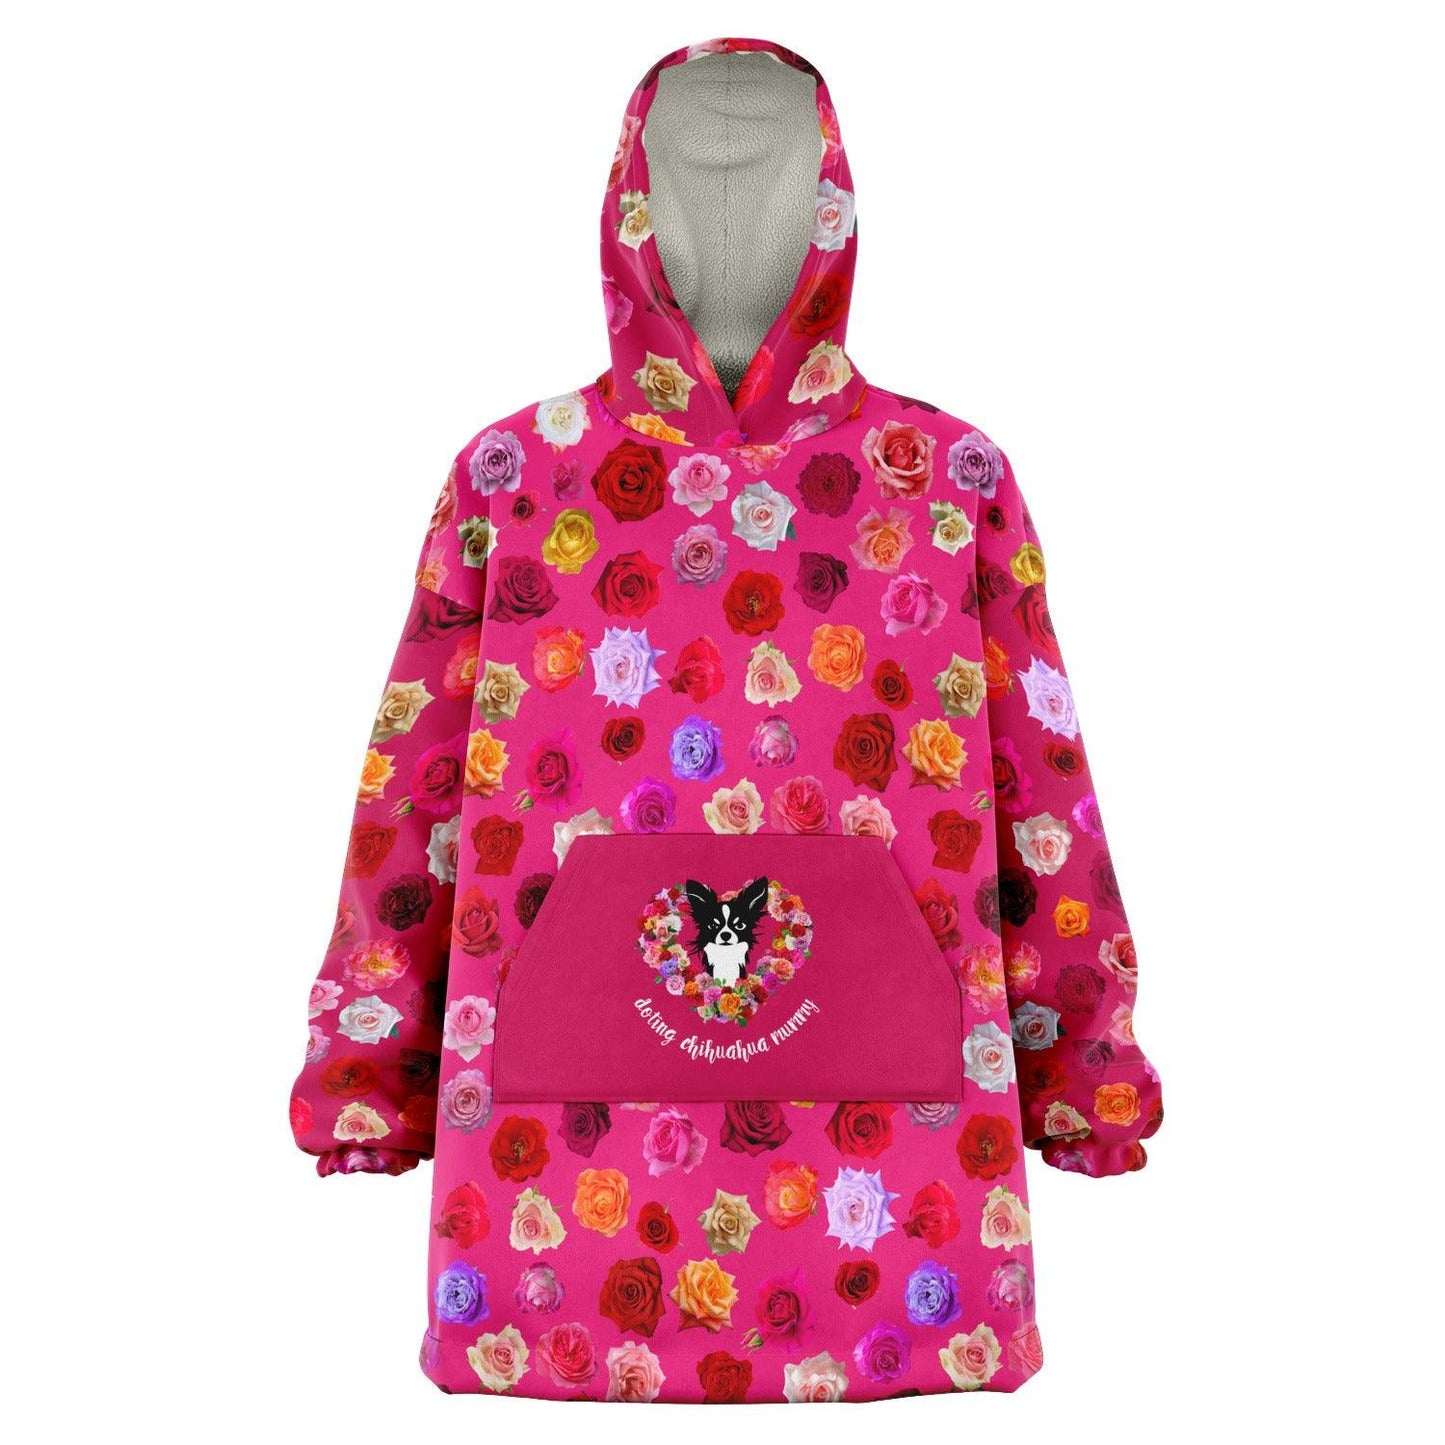 Doting Chihuahua Mummy - Roses Pink Snug Hoodie for Women. One size fits all wearable cosy blanket. Handwarmer front pouch pocket. Ultra soft and warm microfiber fleece lining. Design by Renate Kriegler for Chimigos.